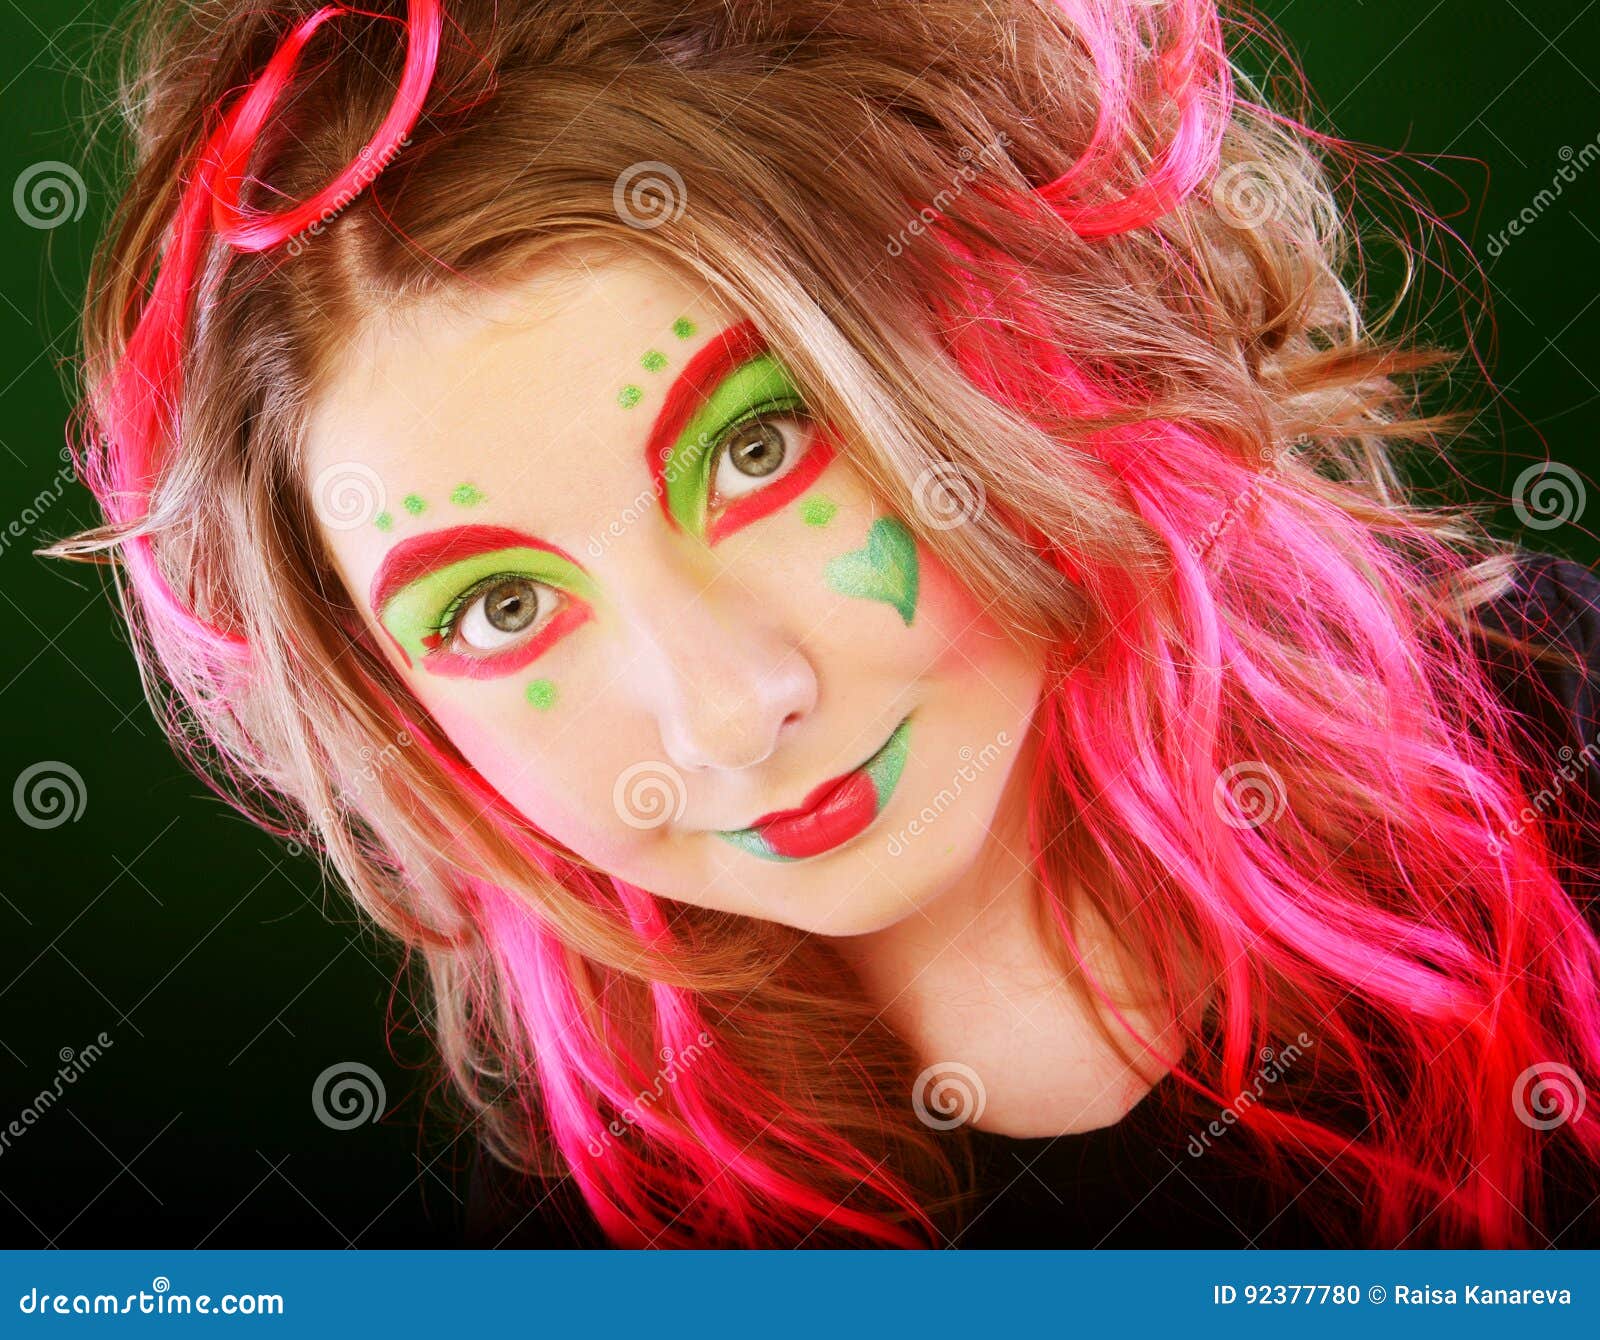 Funny girl with pink hair stock photo. Image of amusing - 92377780